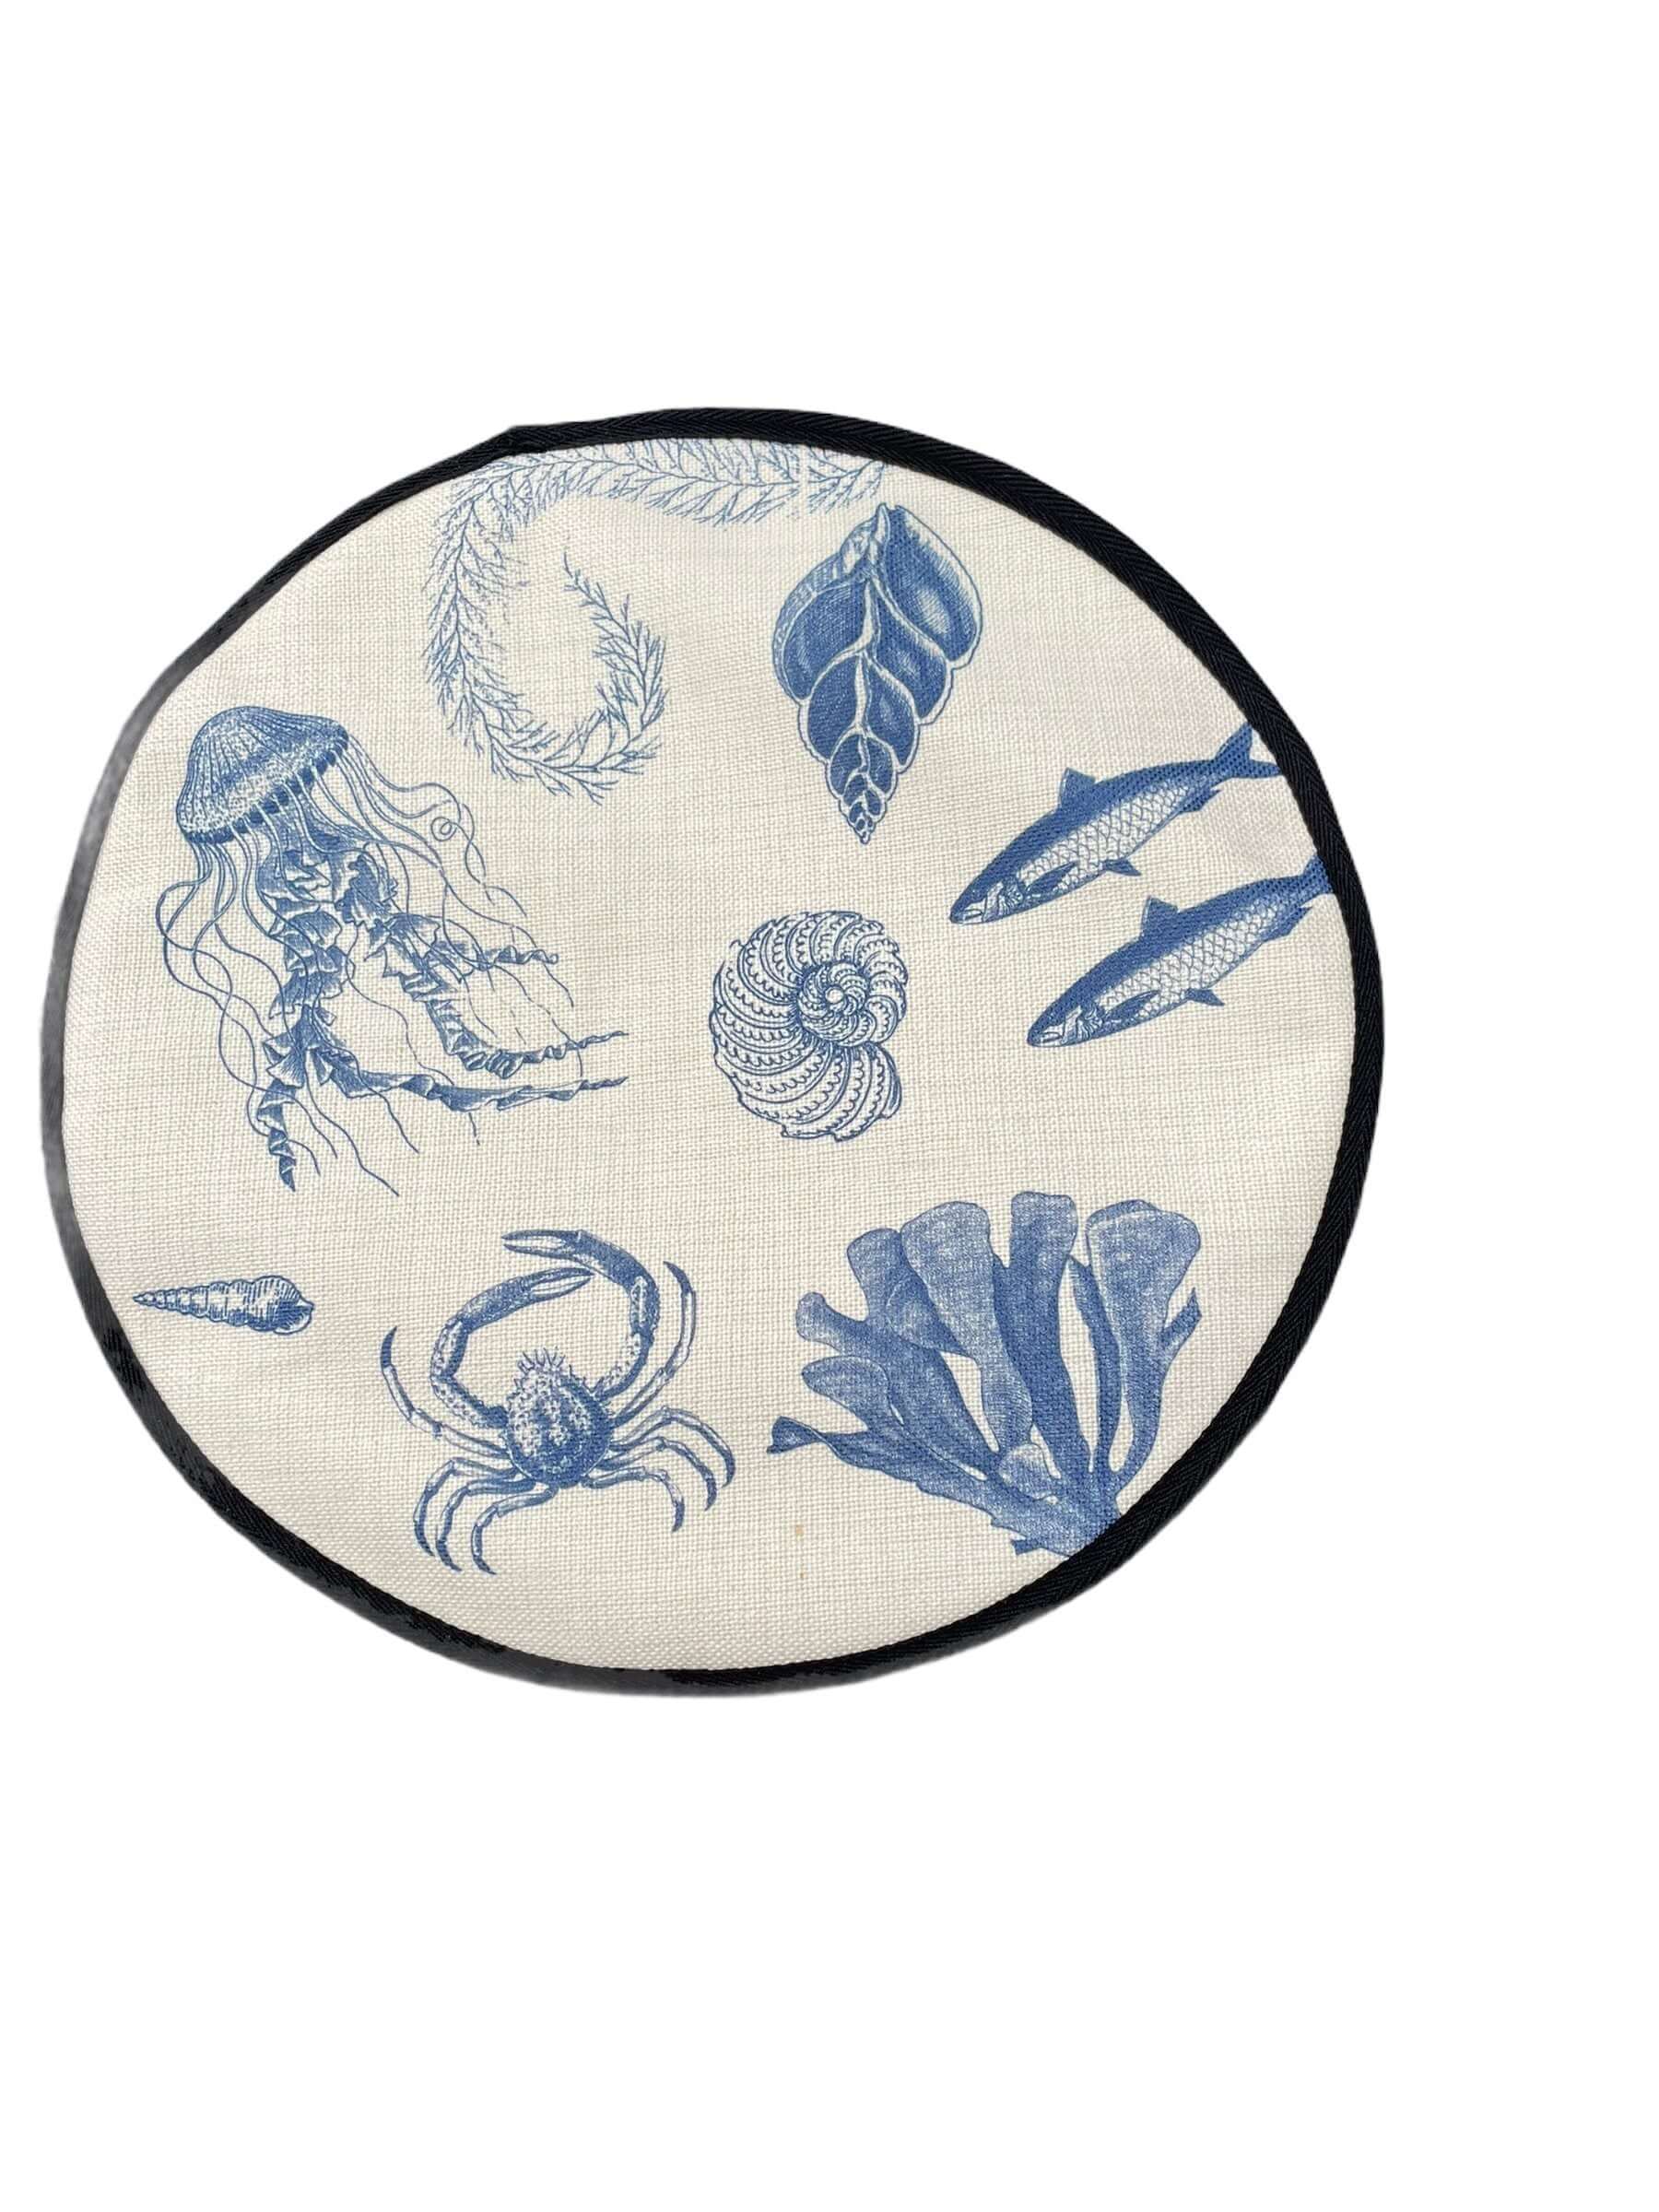 blue illustrations of sealife including fish, seaweed, shells, crabs, jelly fish, and fossilson a beige linen circular hob cover with black hemming.  Mustard and Gray